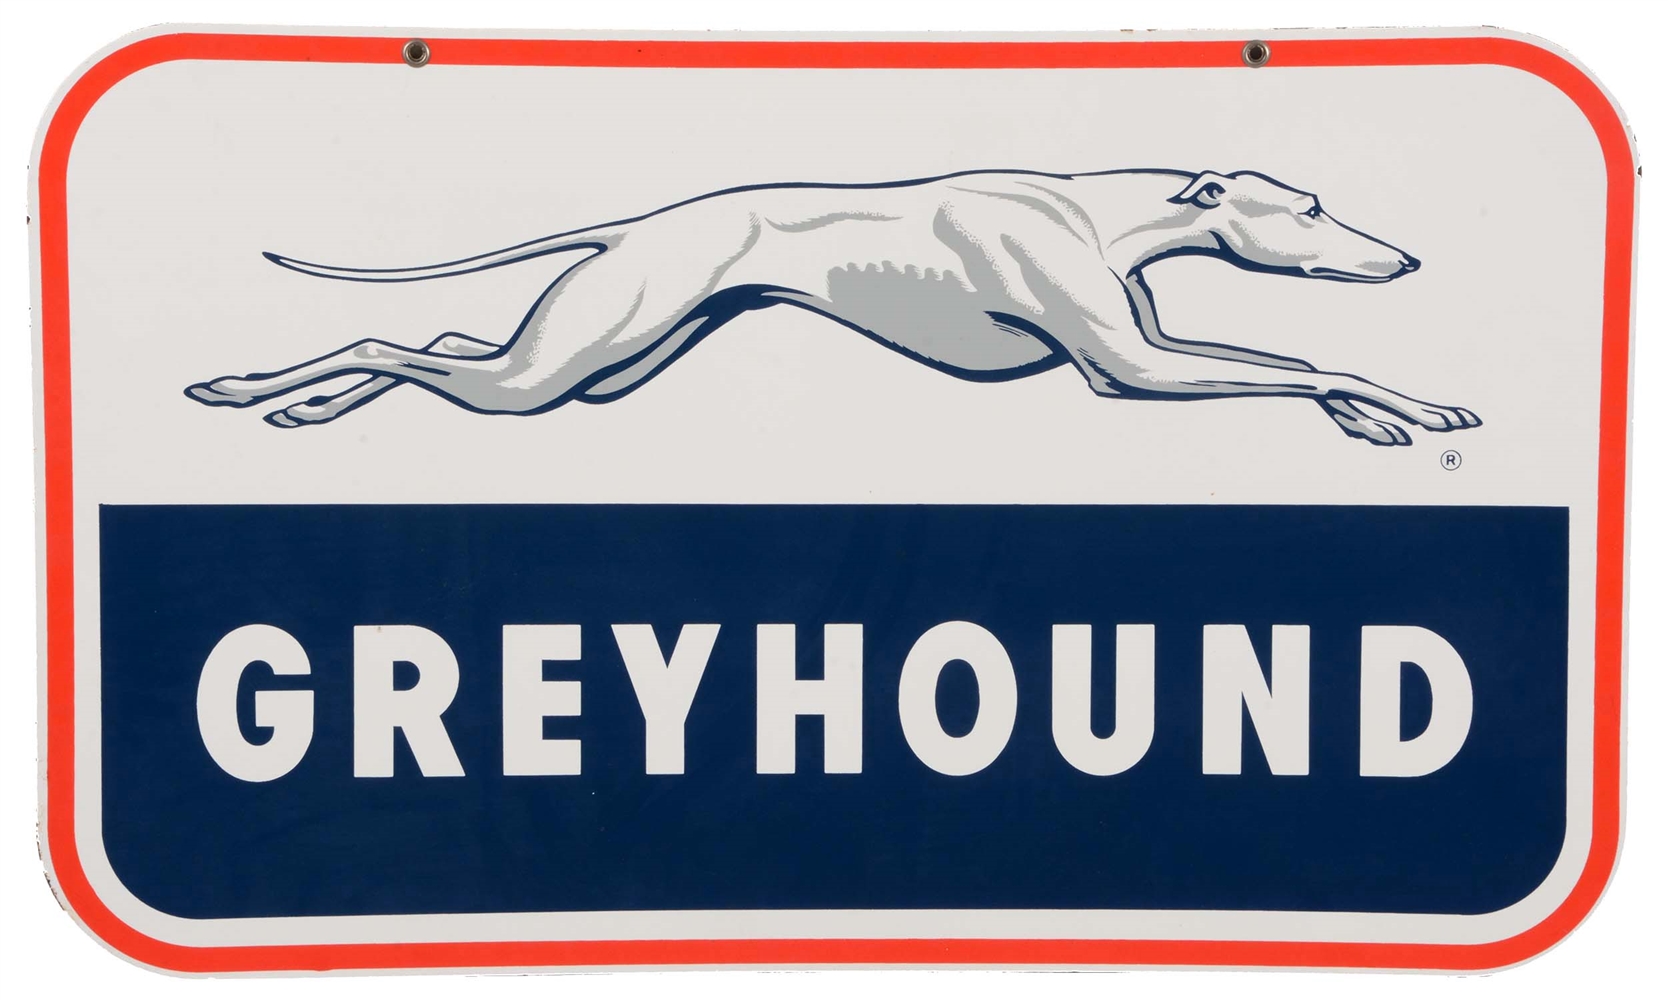 GREYHOUND BUS LINES PORCELAIN SIGN WITH DOG GRAPHIC.